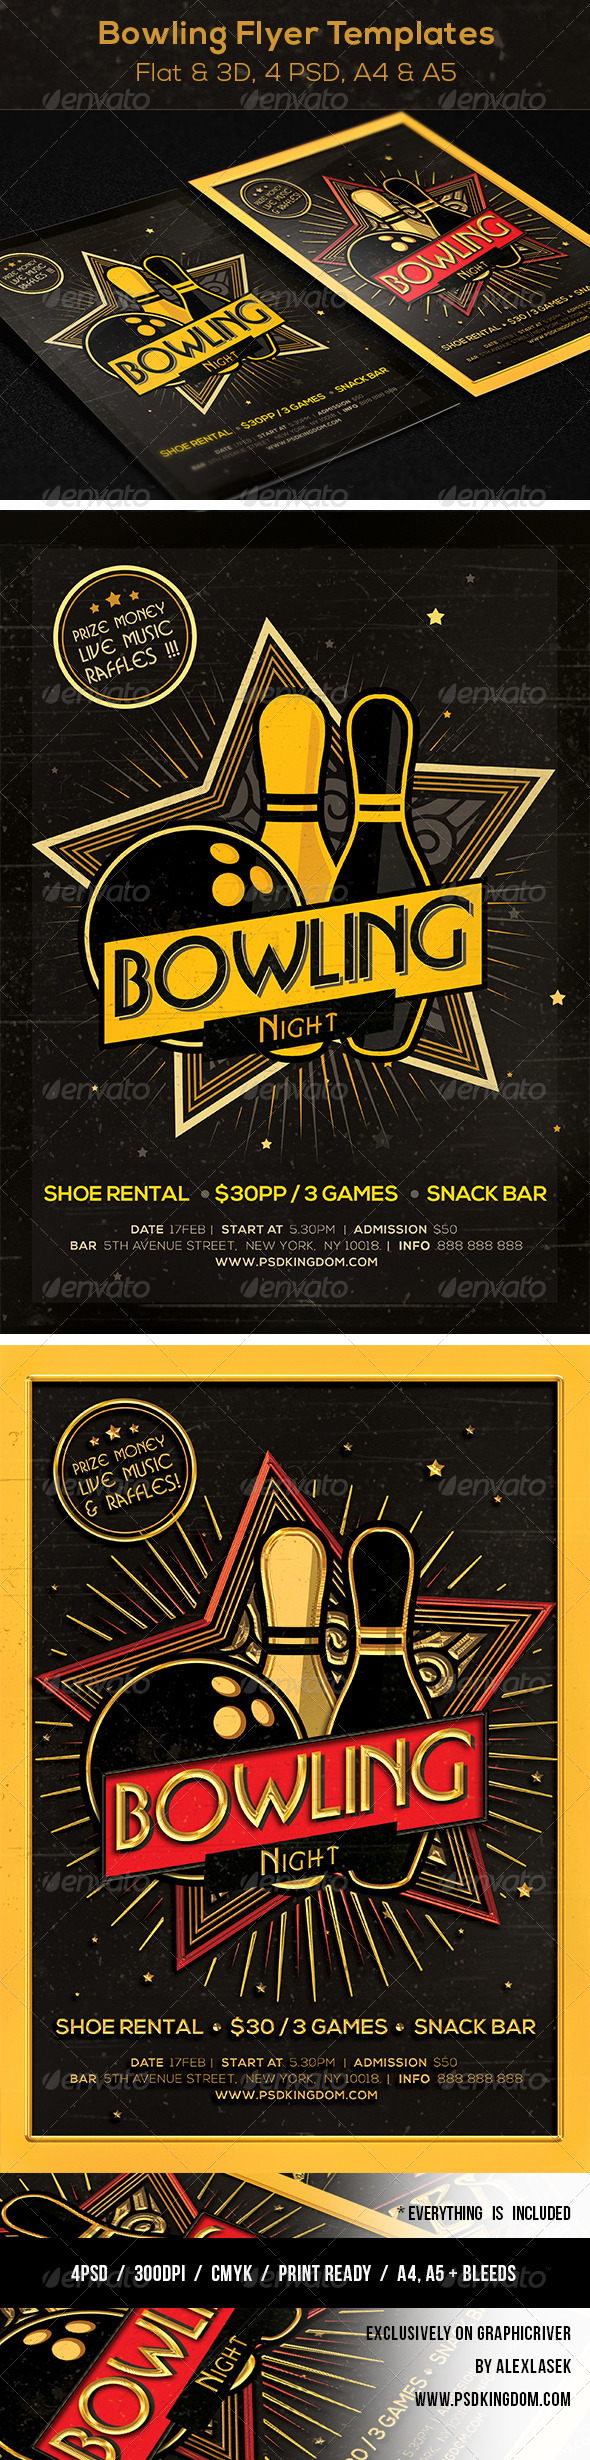 Bowling Magazine Ad, Poster or Flyer  - Flat & 3D